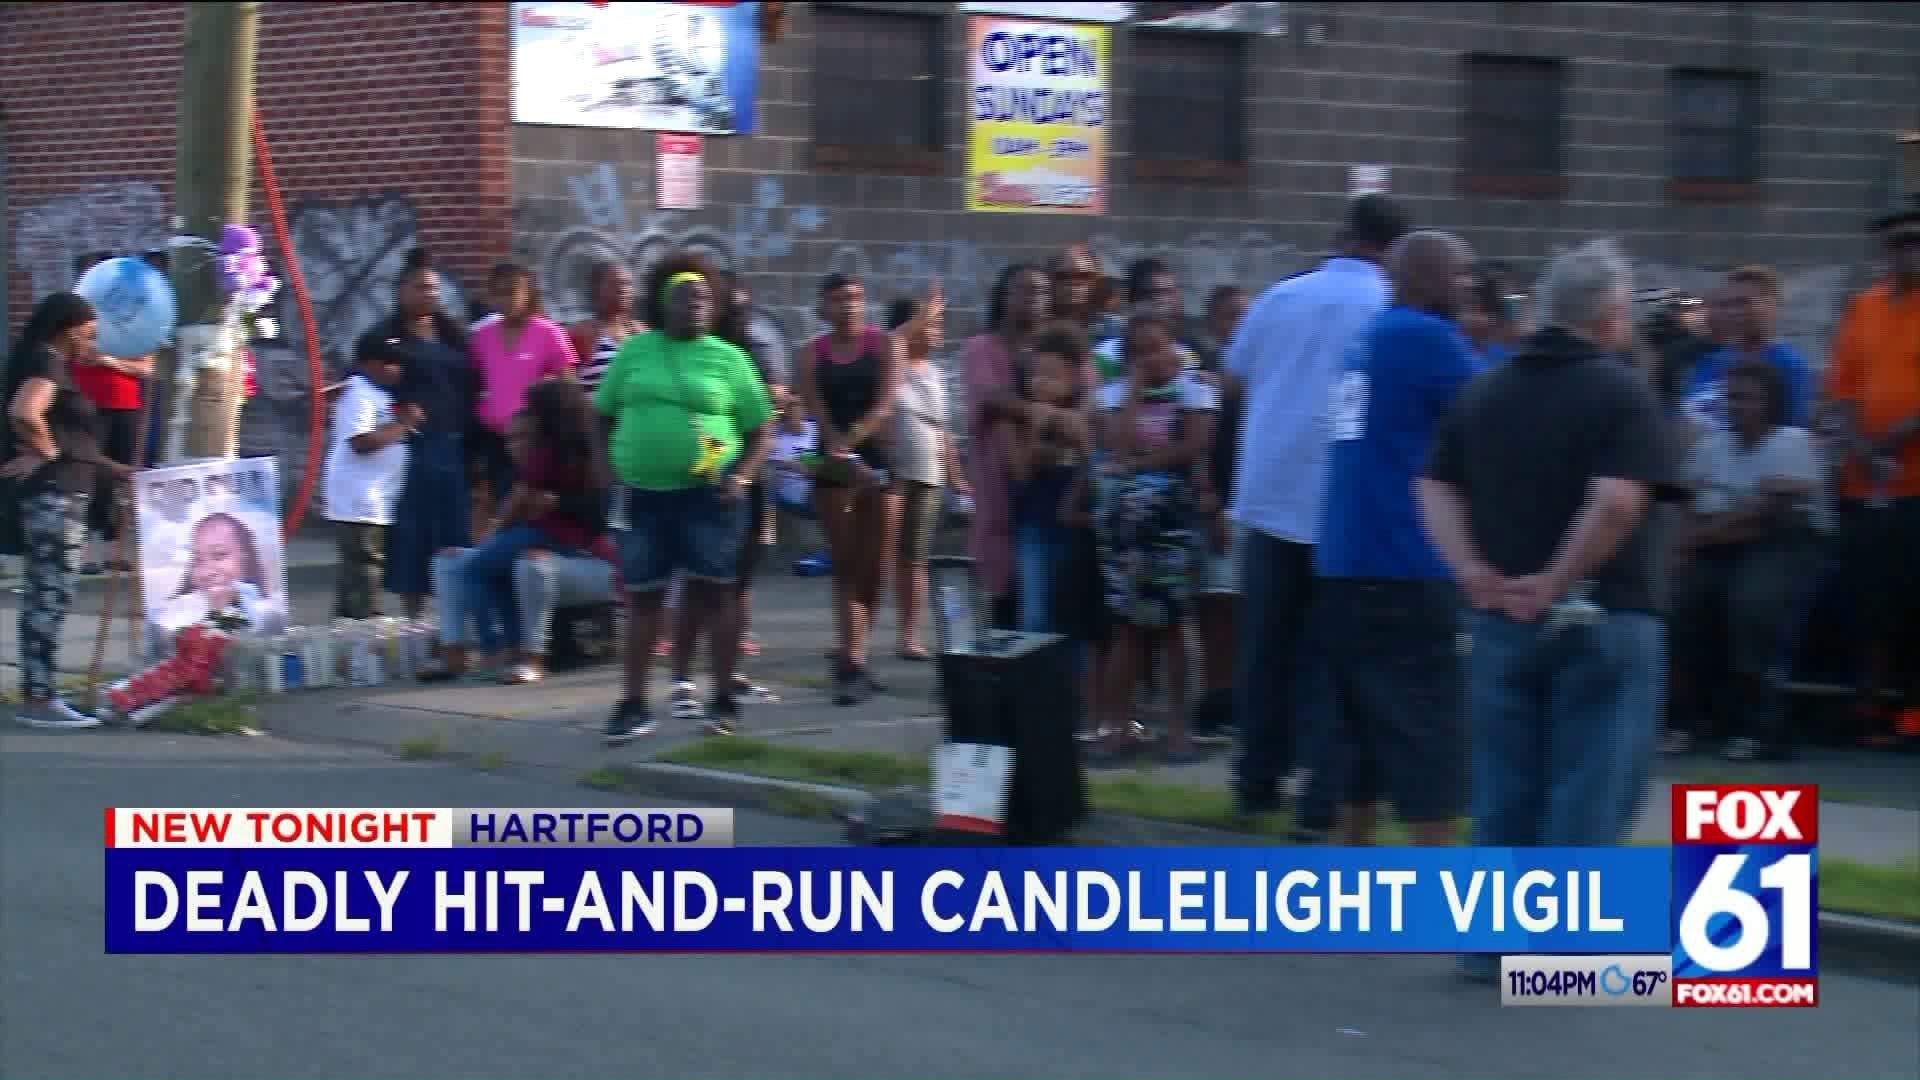 A Community mourns the loss of an innocent life, calls for justice